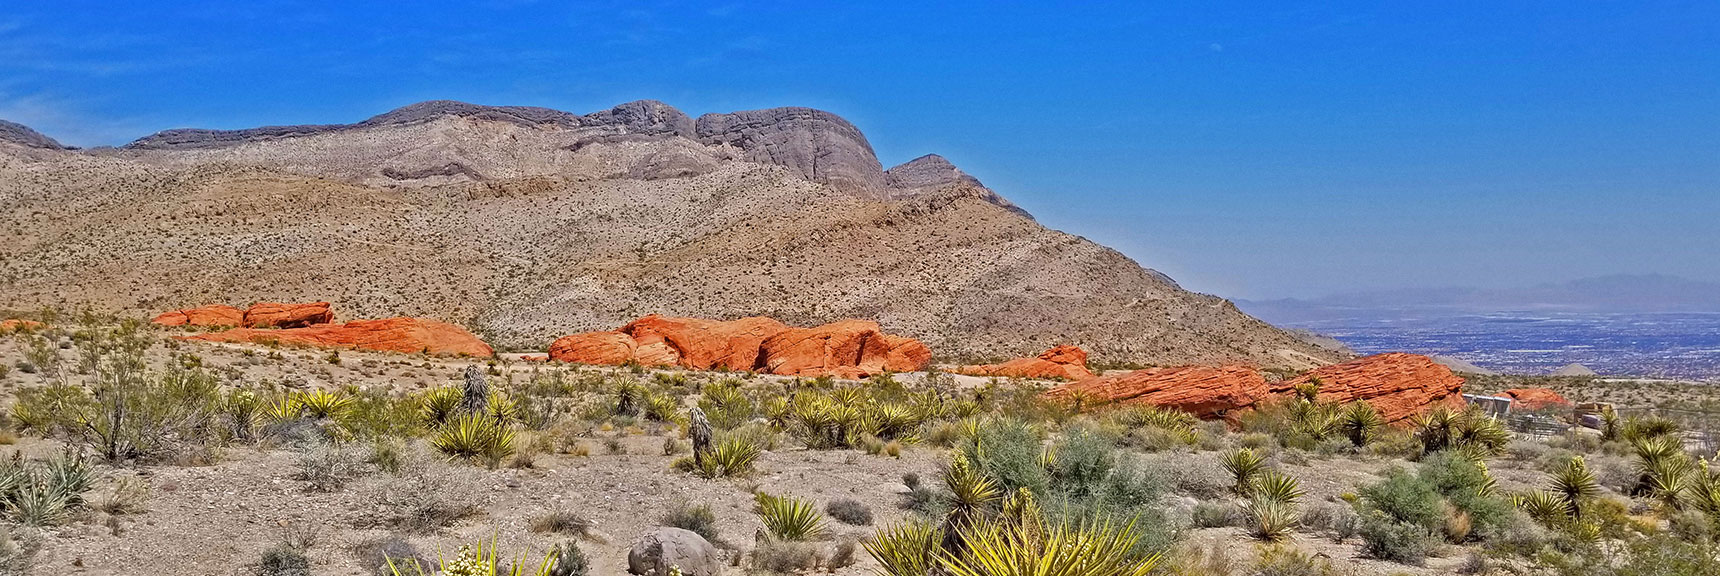 View Toward Starting Point at Lower Right Side of Ridge Ahead | Little Red Rock Las Vegas, Nevada, Near La Madre Mountains Wilderness